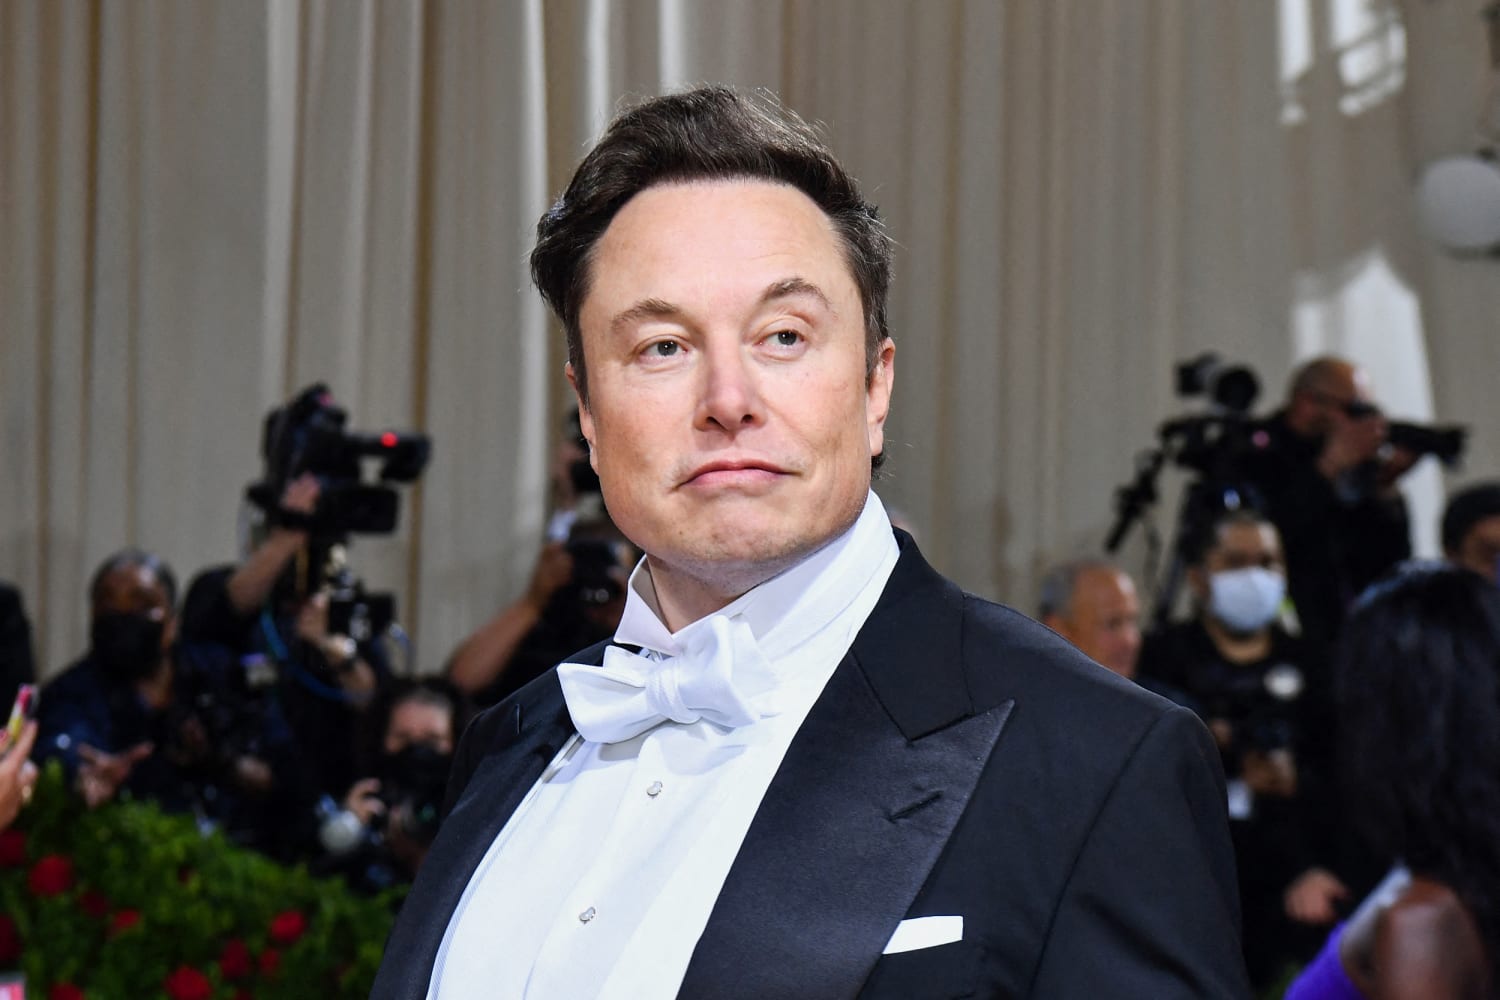 'Millions of dollars were lost': Lawyers spar over whether Elon Musk misled investors with his tweets